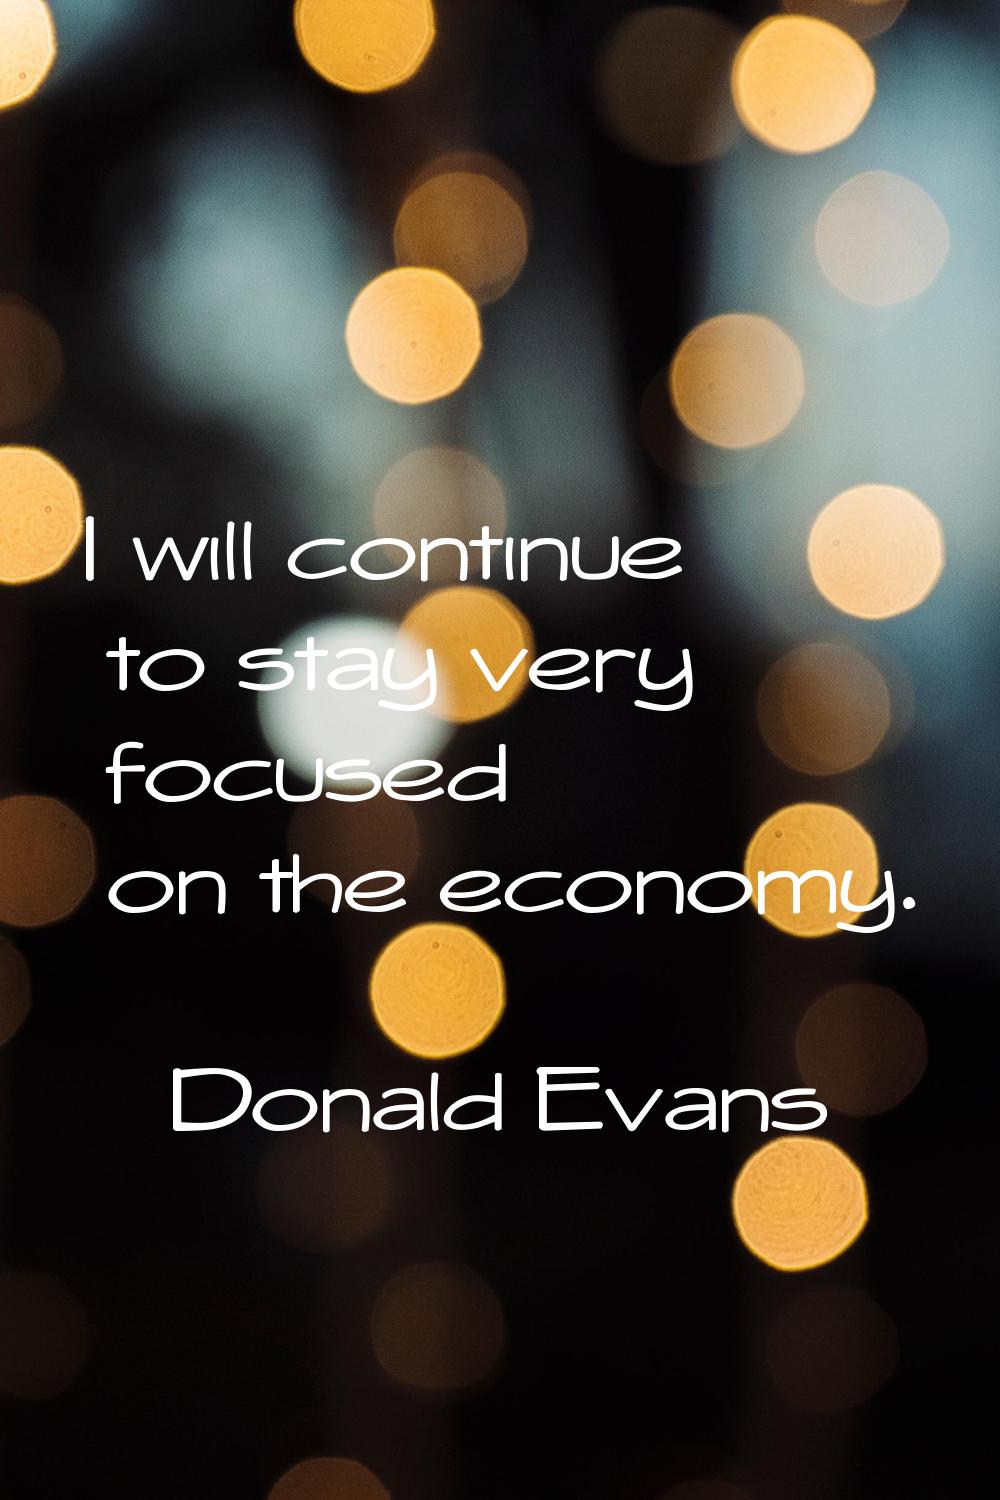 I will continue to stay very focused on the economy.